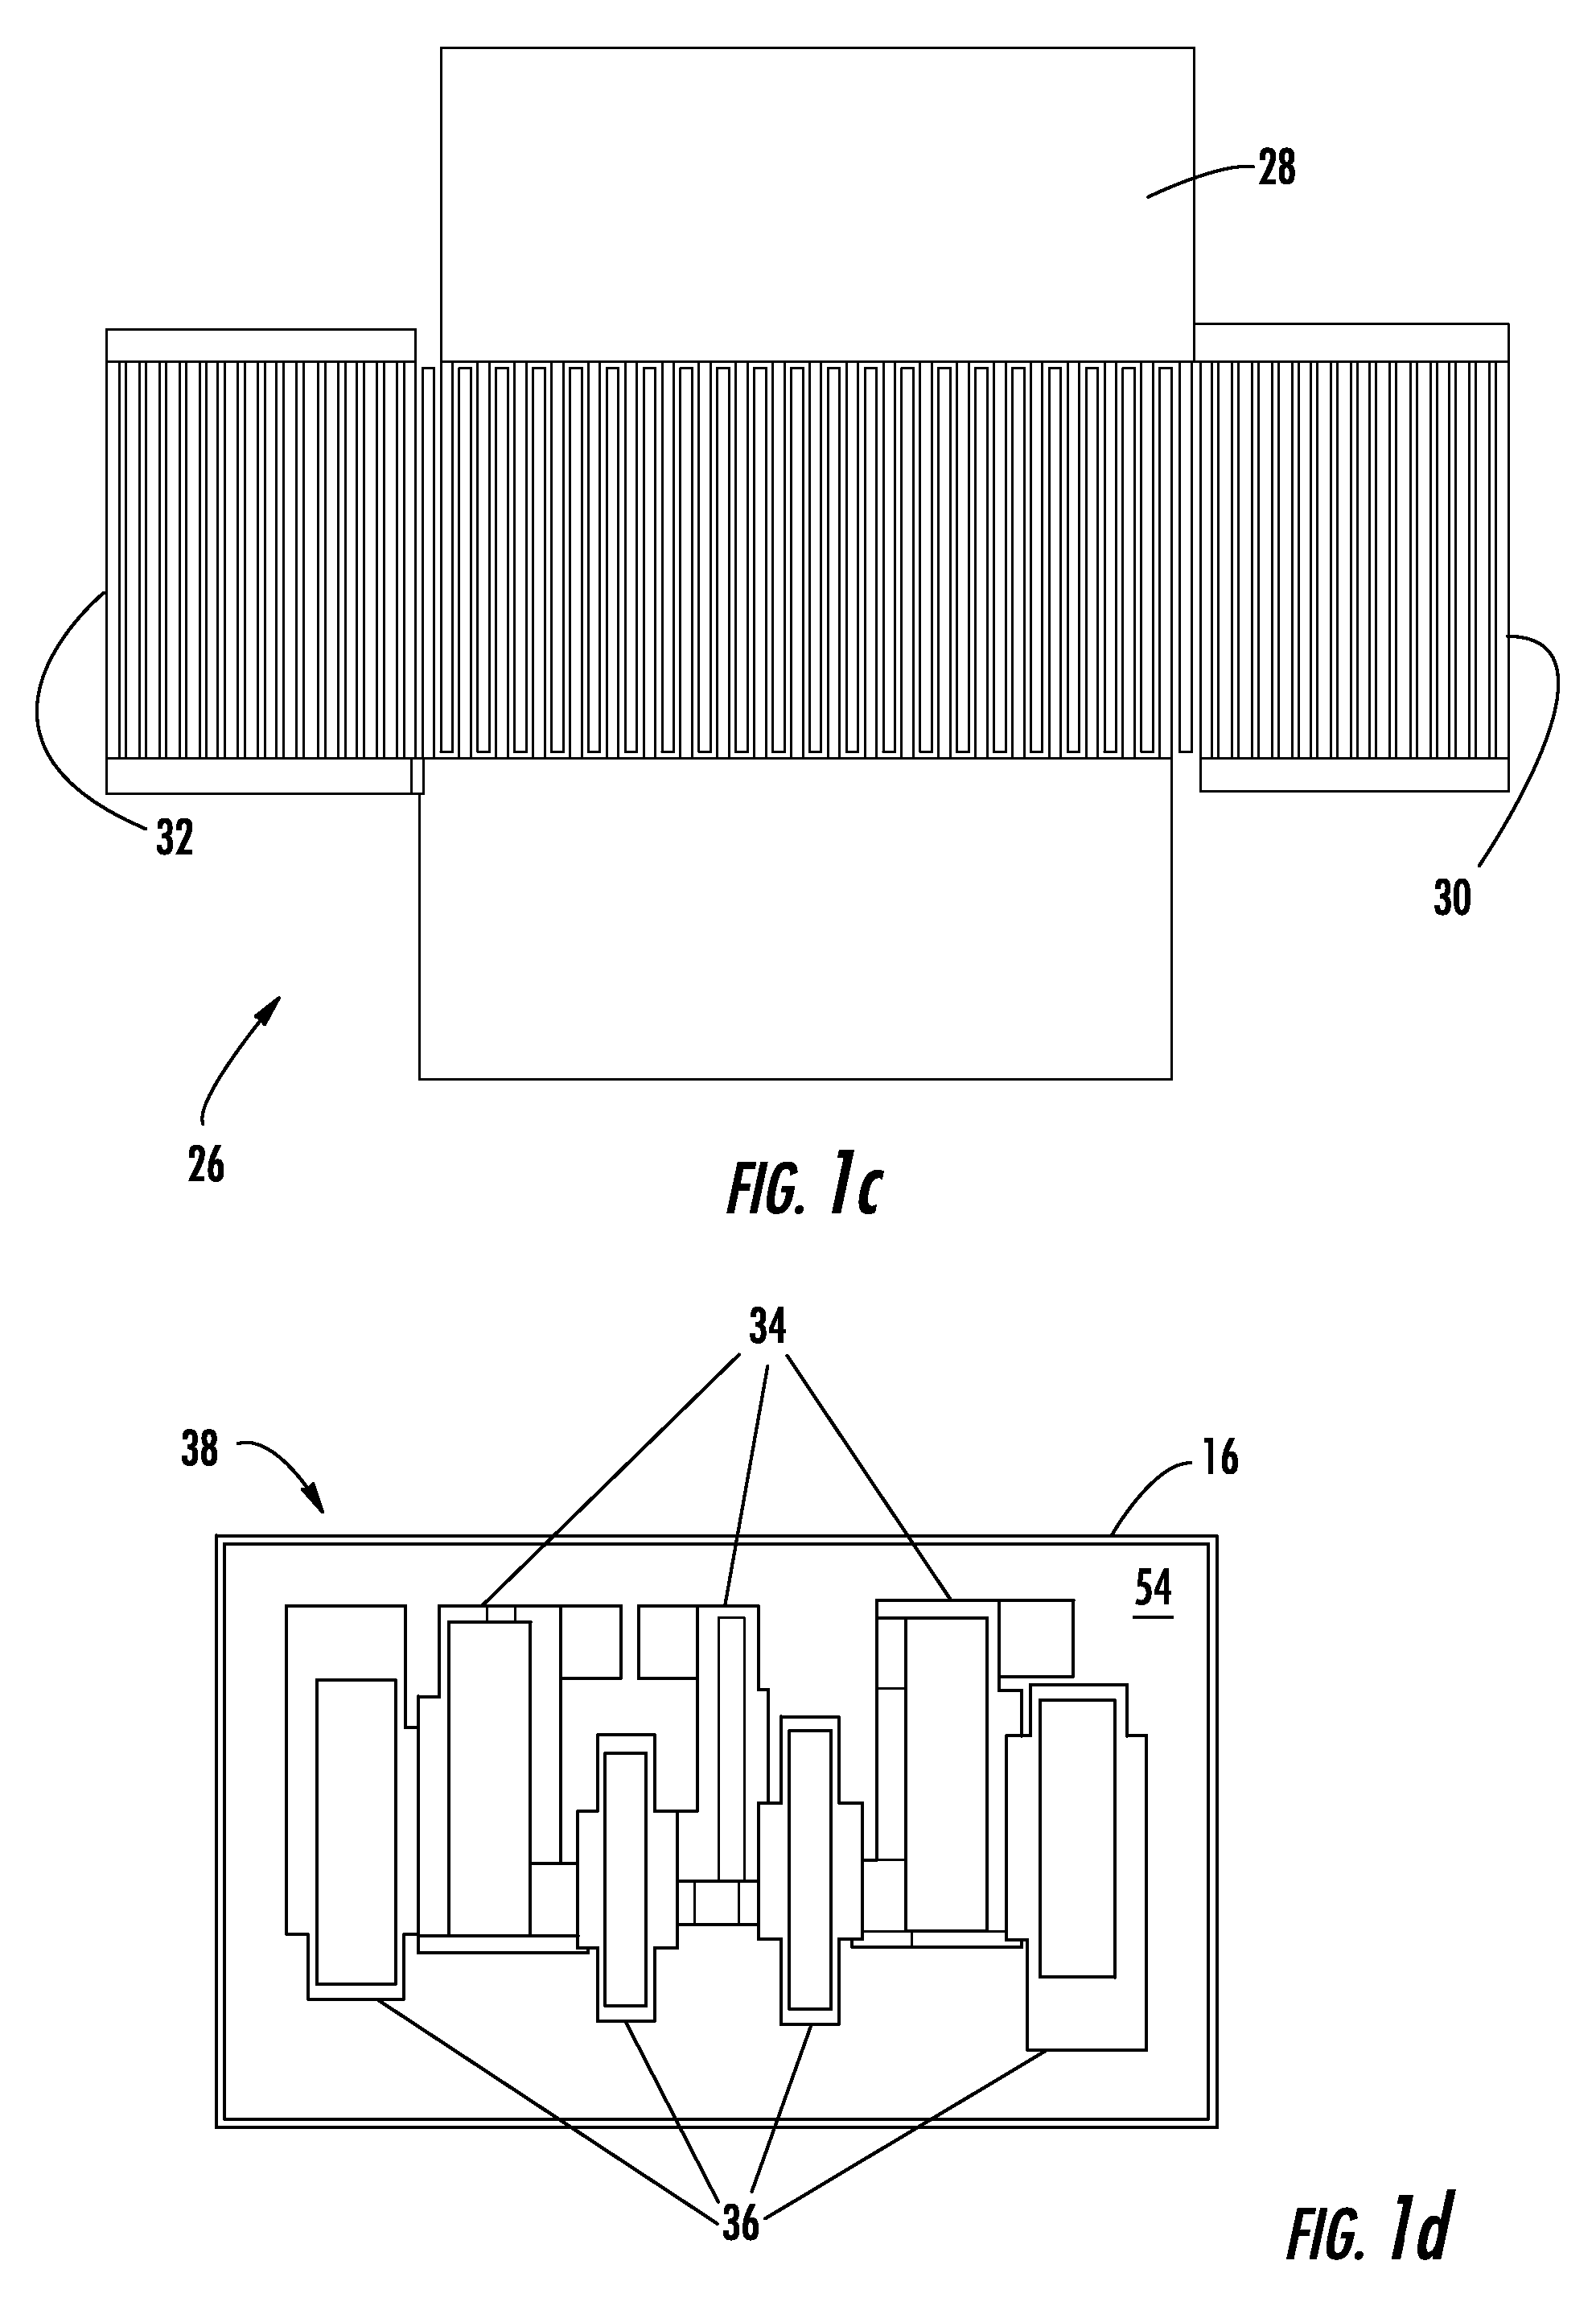 SAW Filter Device and Method Employing Normal Temperature Bonding for Producing Desirable Filter Production and Performance Characteristics